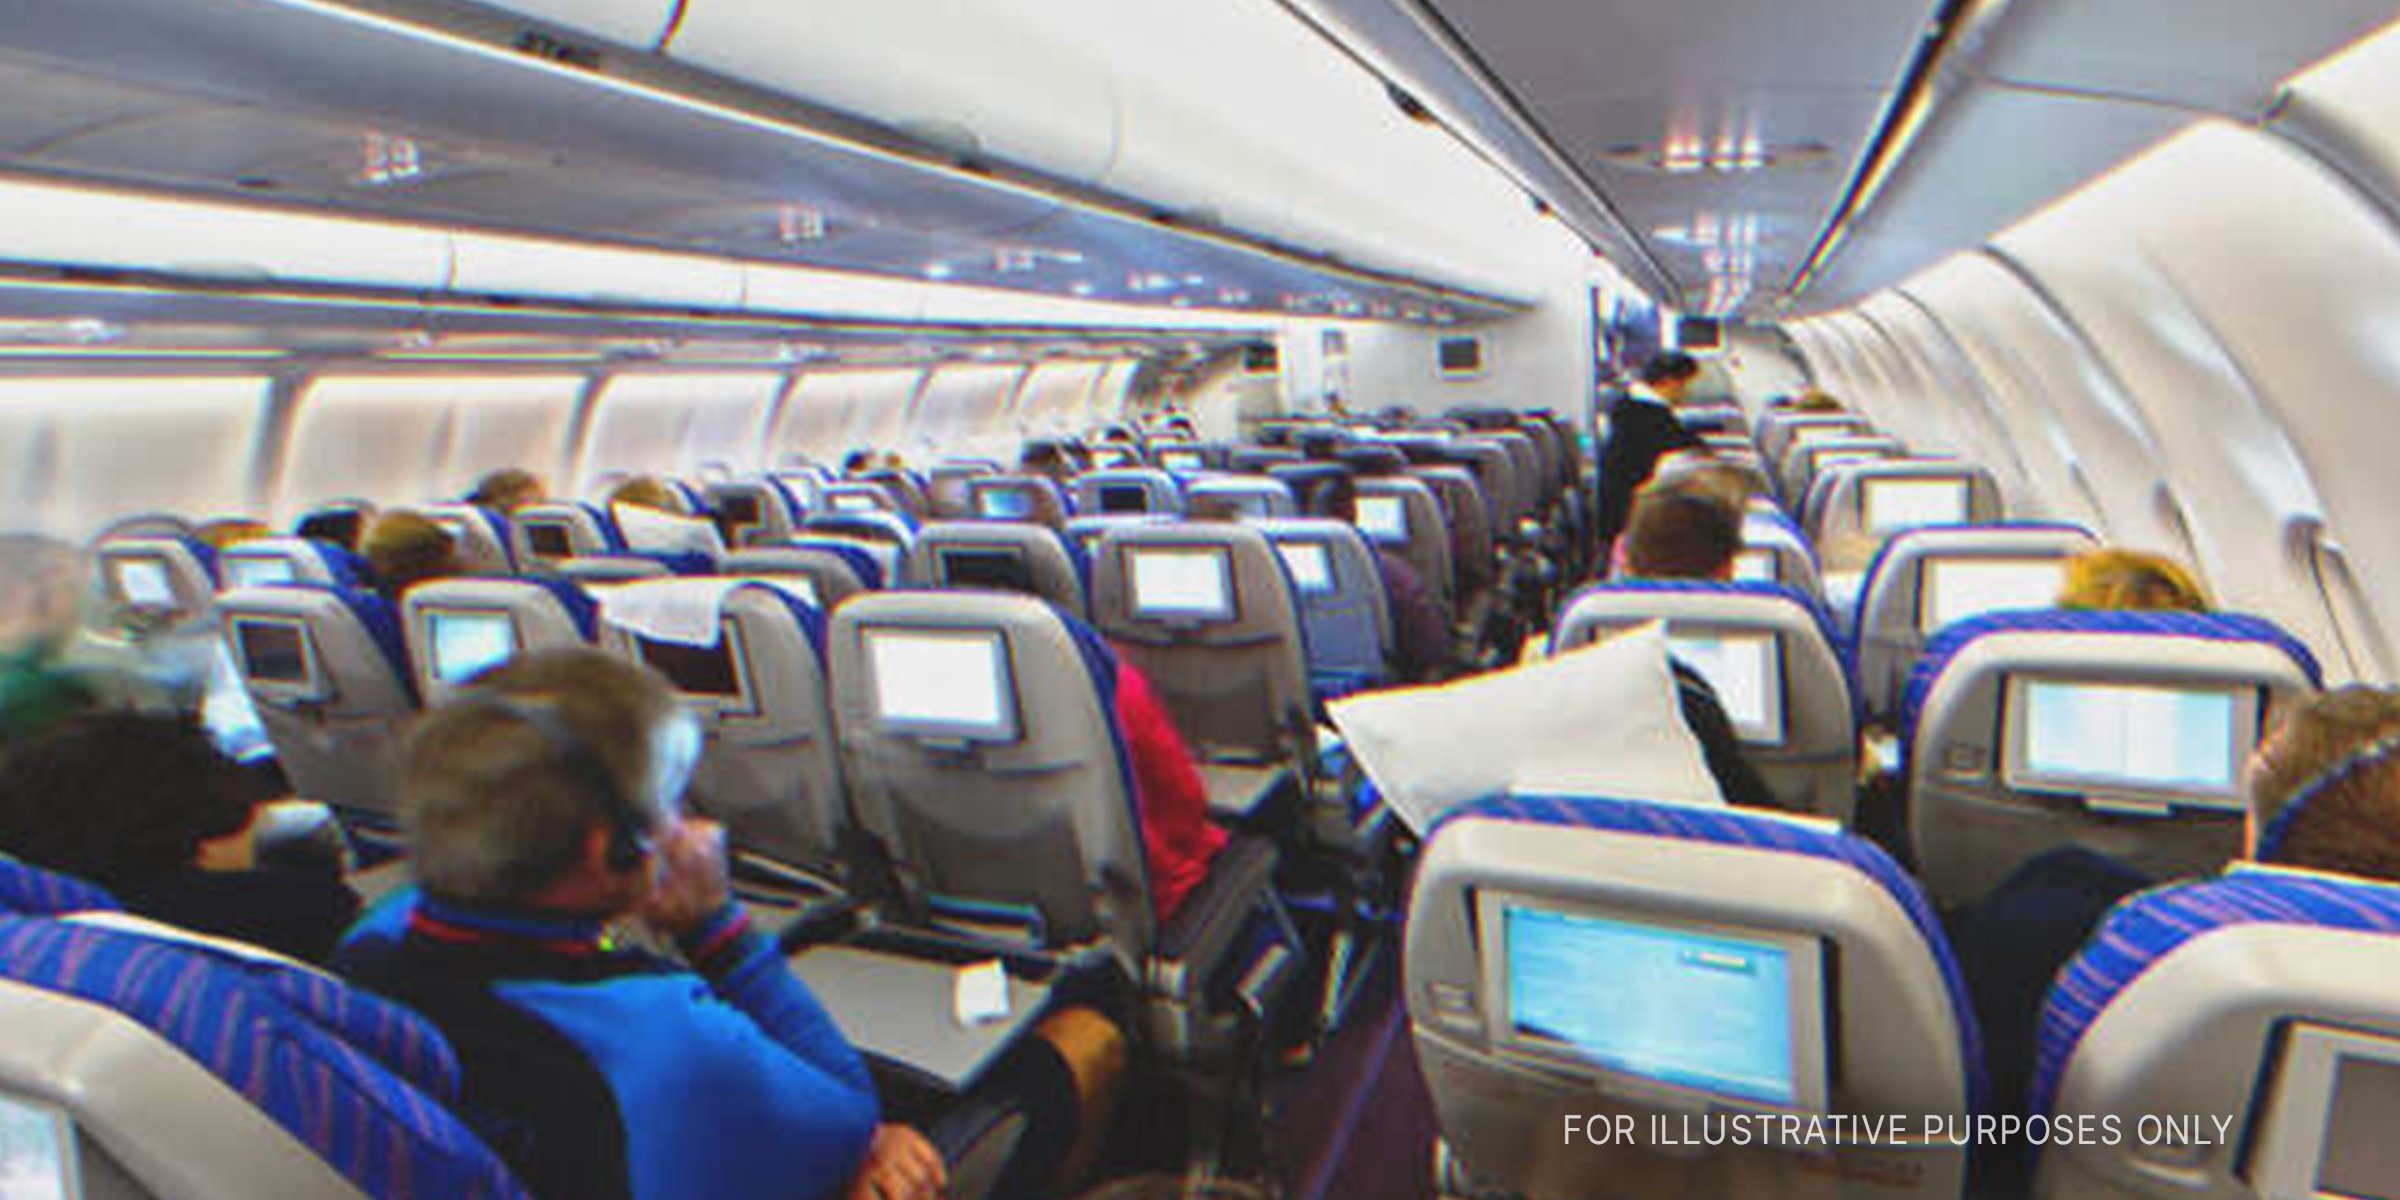 Passengers seated in an airplane | Shutterstock